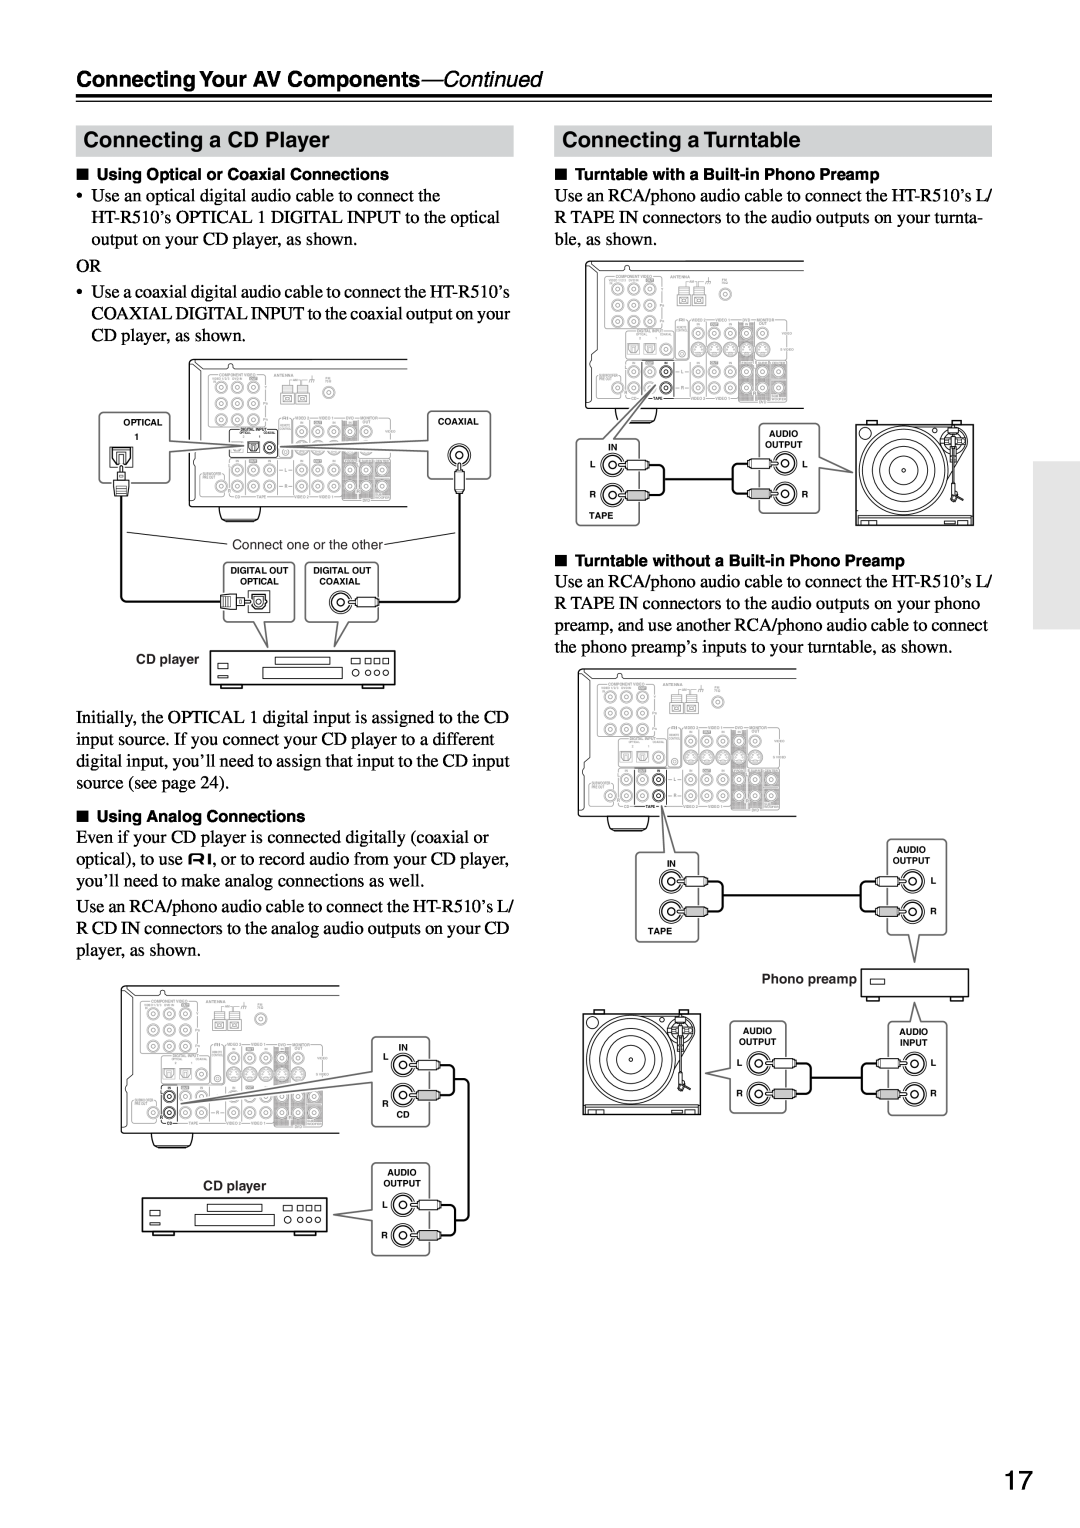 Onkyo HT-R510 instruction manual Connecting a CD Player, Connecting a Turntable, Connecting Your AV Components-Continued 